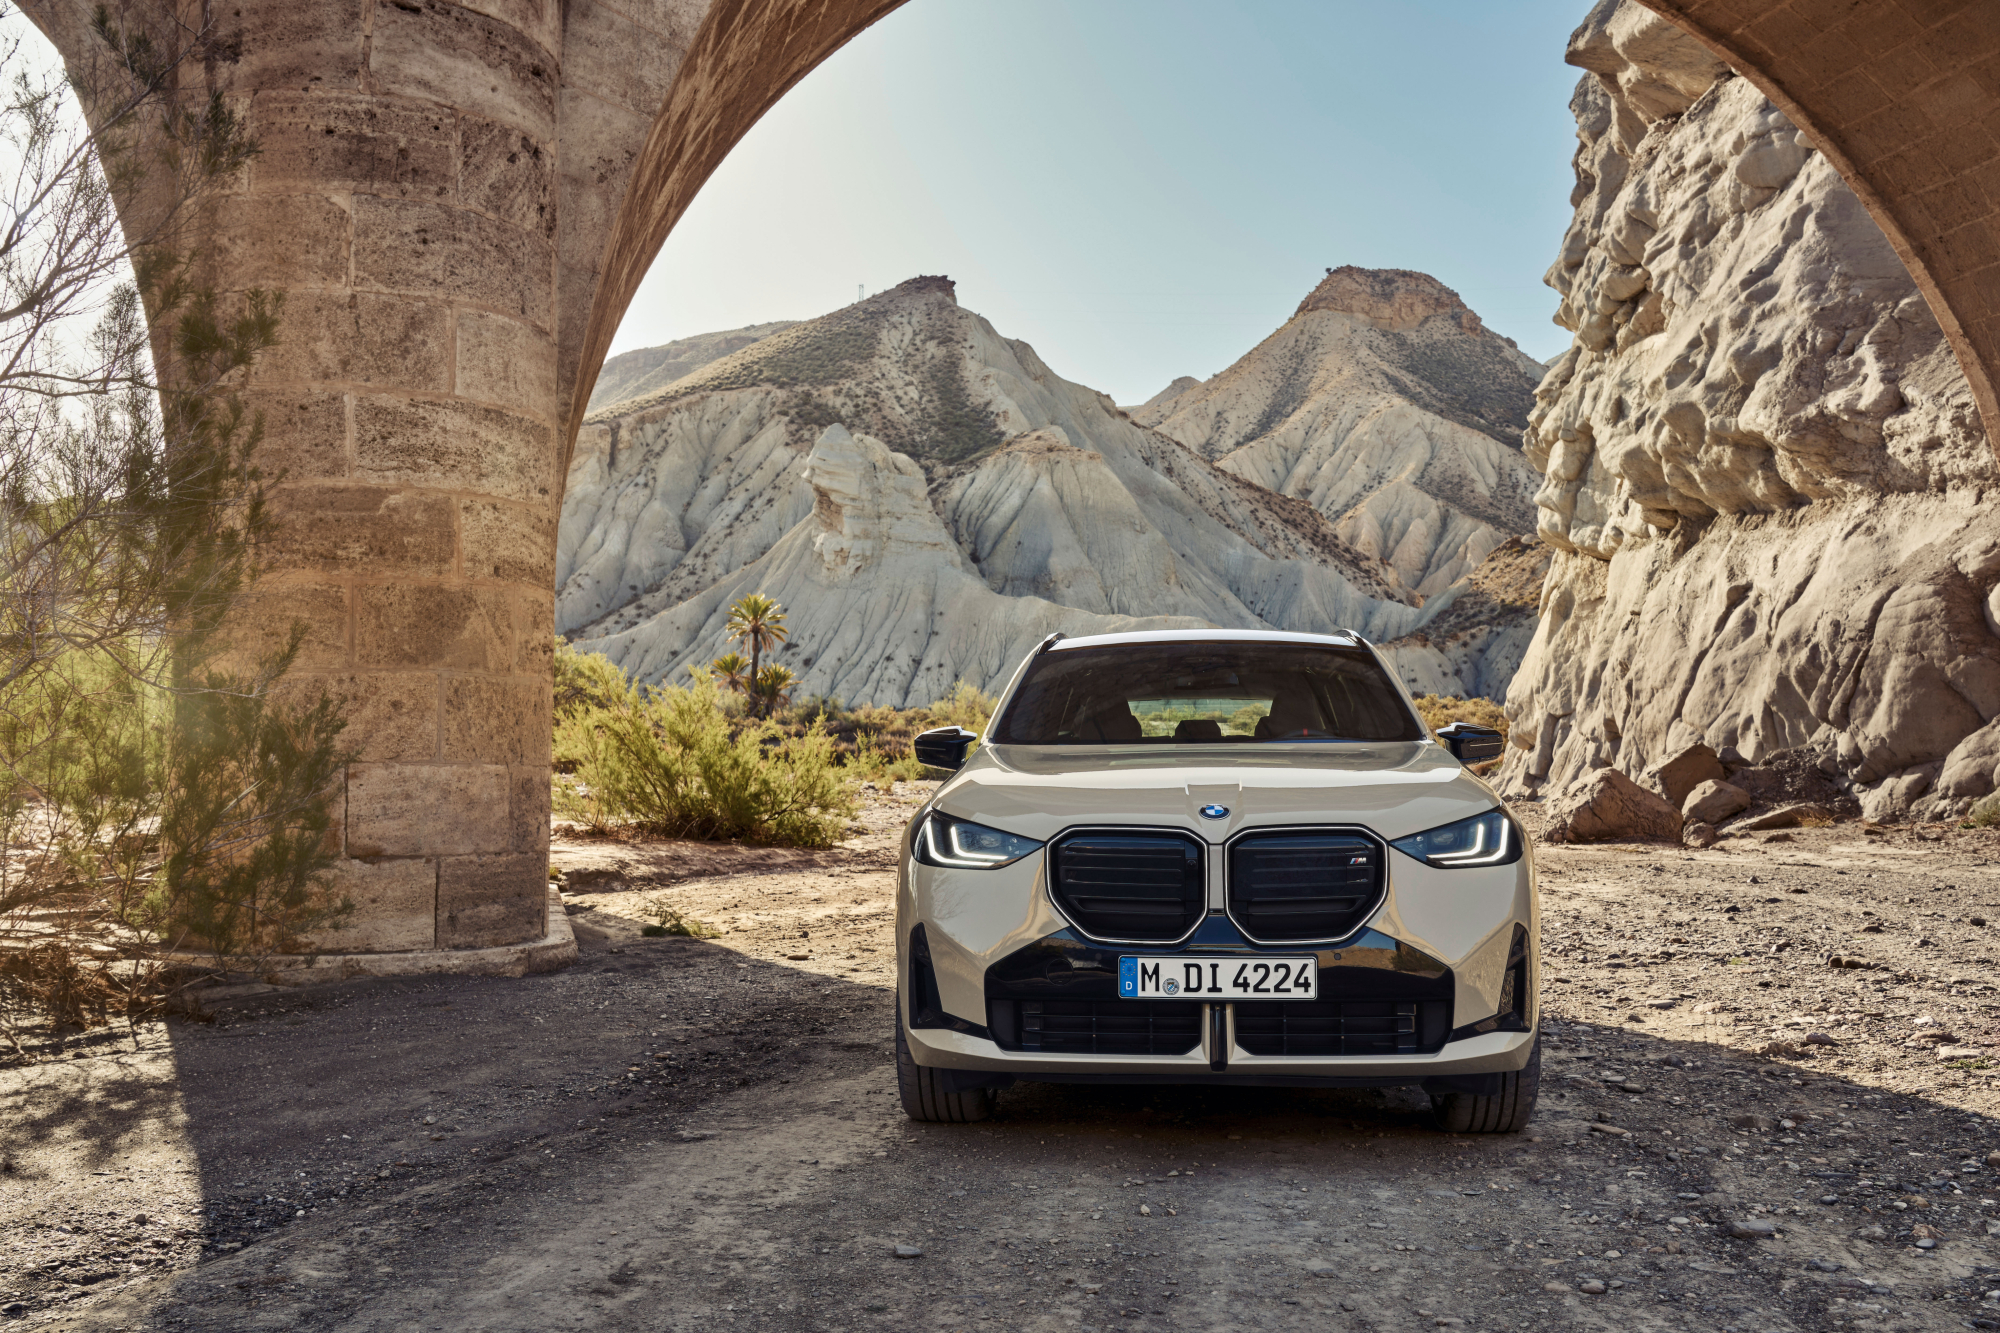 2025 BMW X3 M50 xDrive direct front view with the car parked under a stone structure in the desert.